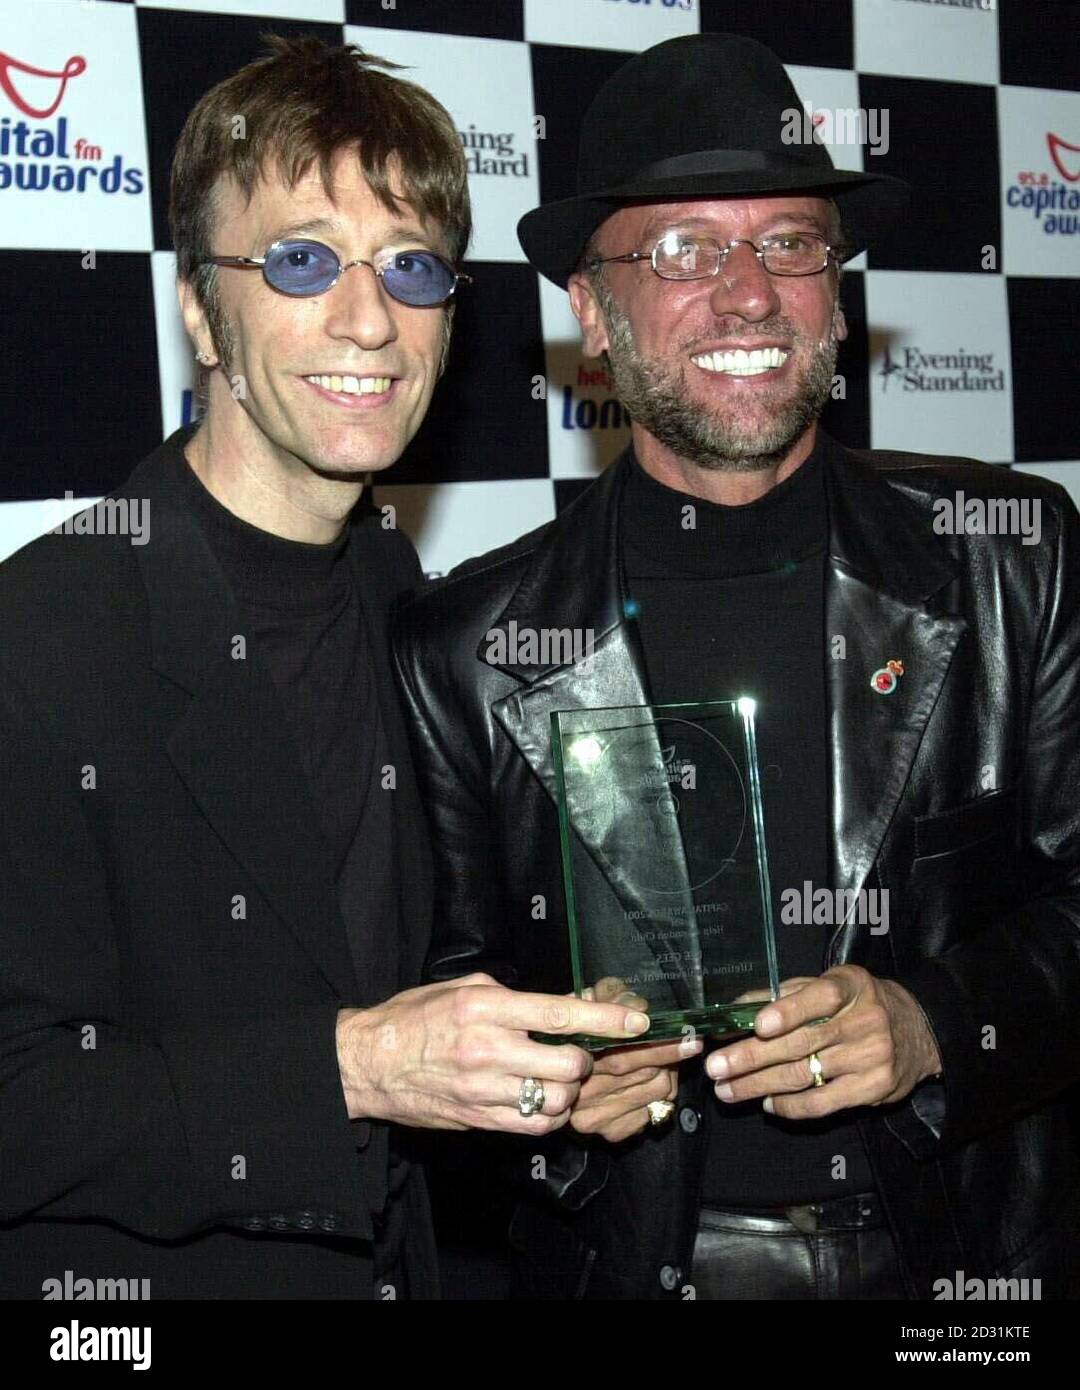 Robin (left) and Maurice Gibb of Bee Gees with their Lifetime Achievement award the Capital Radio Awards at the Royal Lancaster Hotel in London.  10/02/03 : Bee Gee Robin Gibb launched a furious attack on comic Graham Norton for making a joke about the death of his brother Maurice - threatening to rip his head off if the two ever met. Gibb branded Norton scum and demanded a personal apology for a tasteless gag the presenter made on his Channel 4 chat show. Maurice, 53, died in a Miami hospital last month and Norton joked to TV viewers: I bet Maurice Gibb's heart monitor was singing the tune of Stock Photo